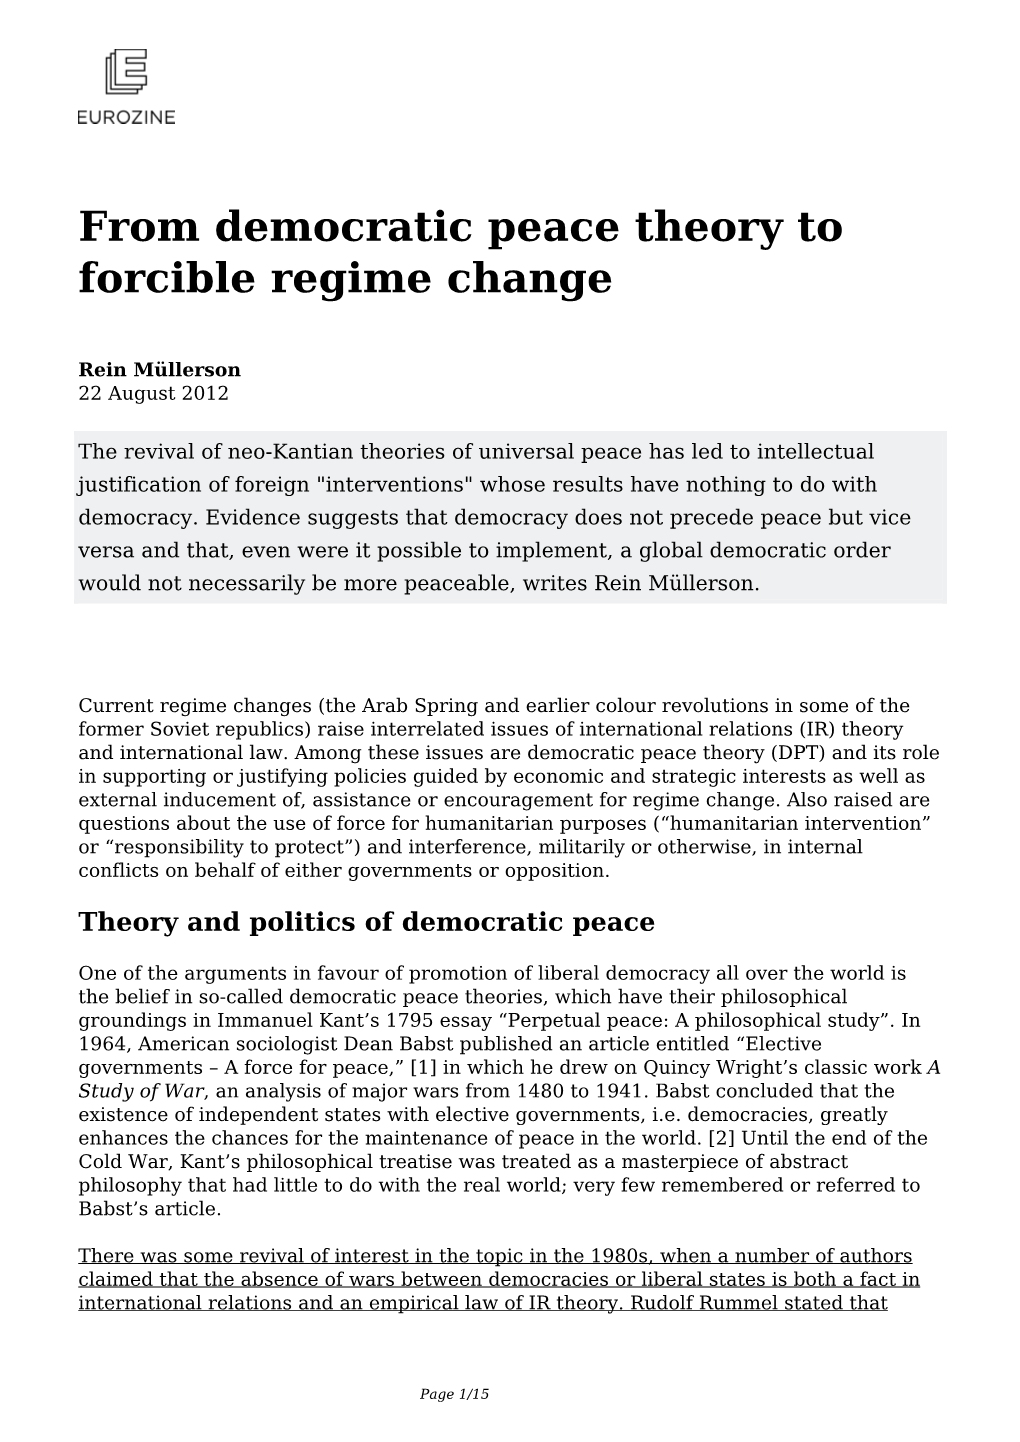 From Democratic Peace Theory to Forcible Regime Change